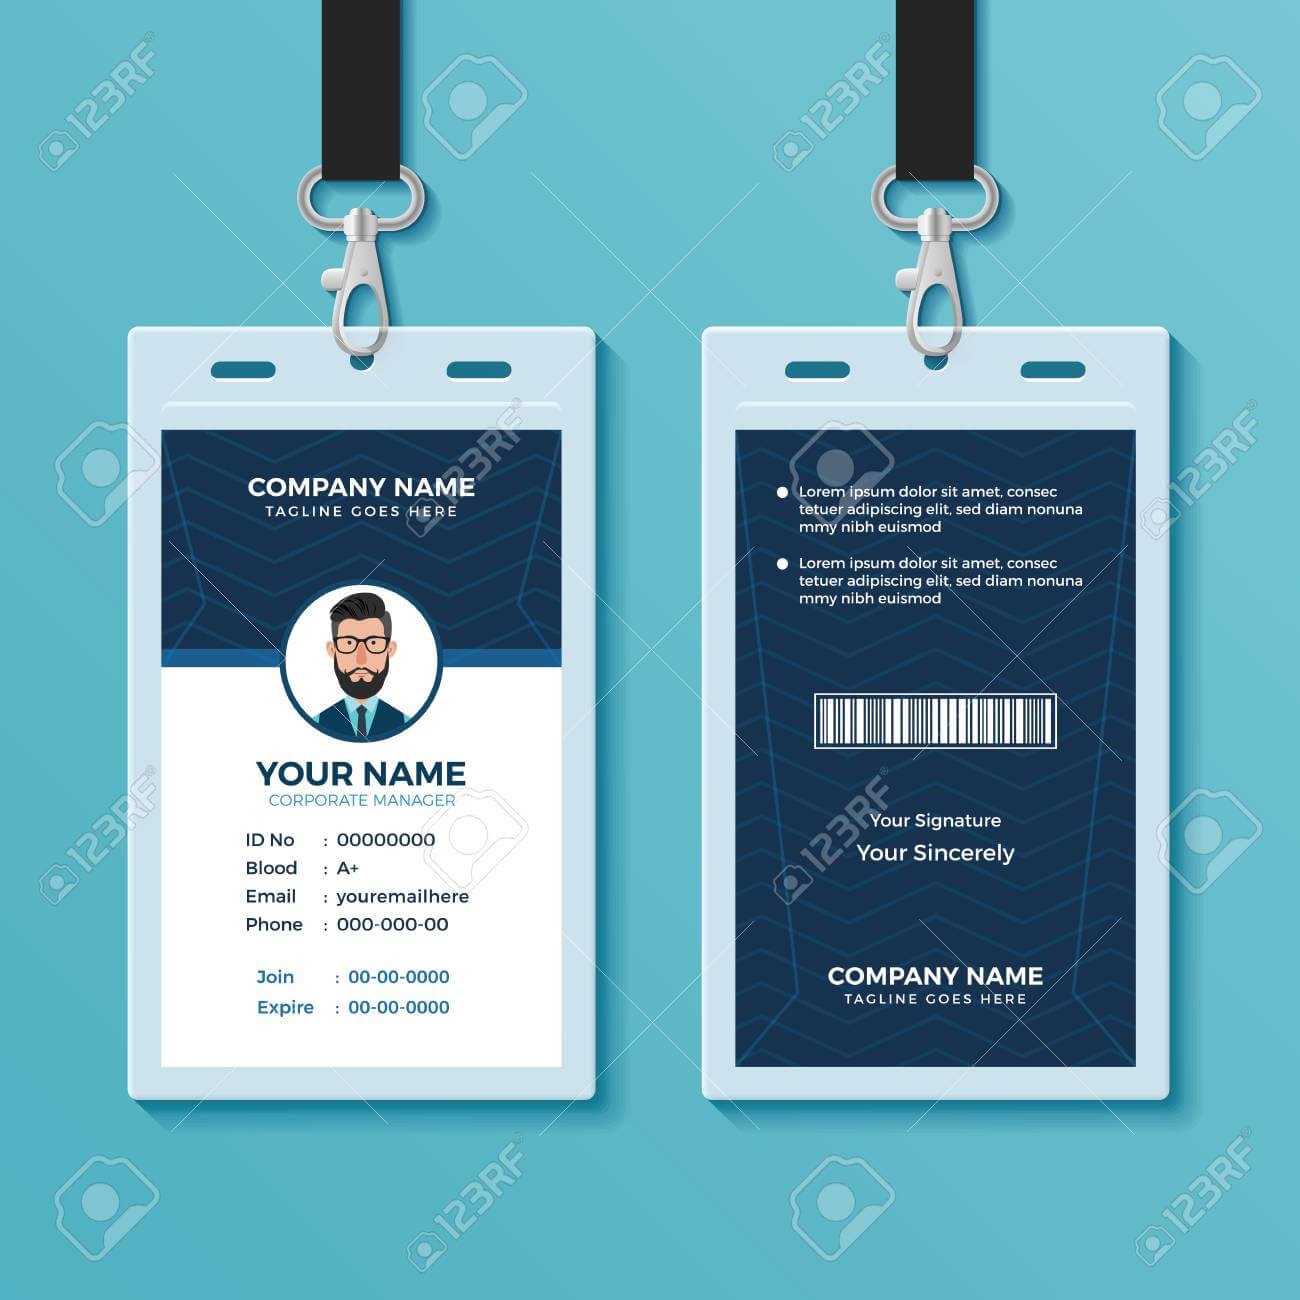 Modern And Clean Id Card Design Template With Regard To Portrait Id Card Template